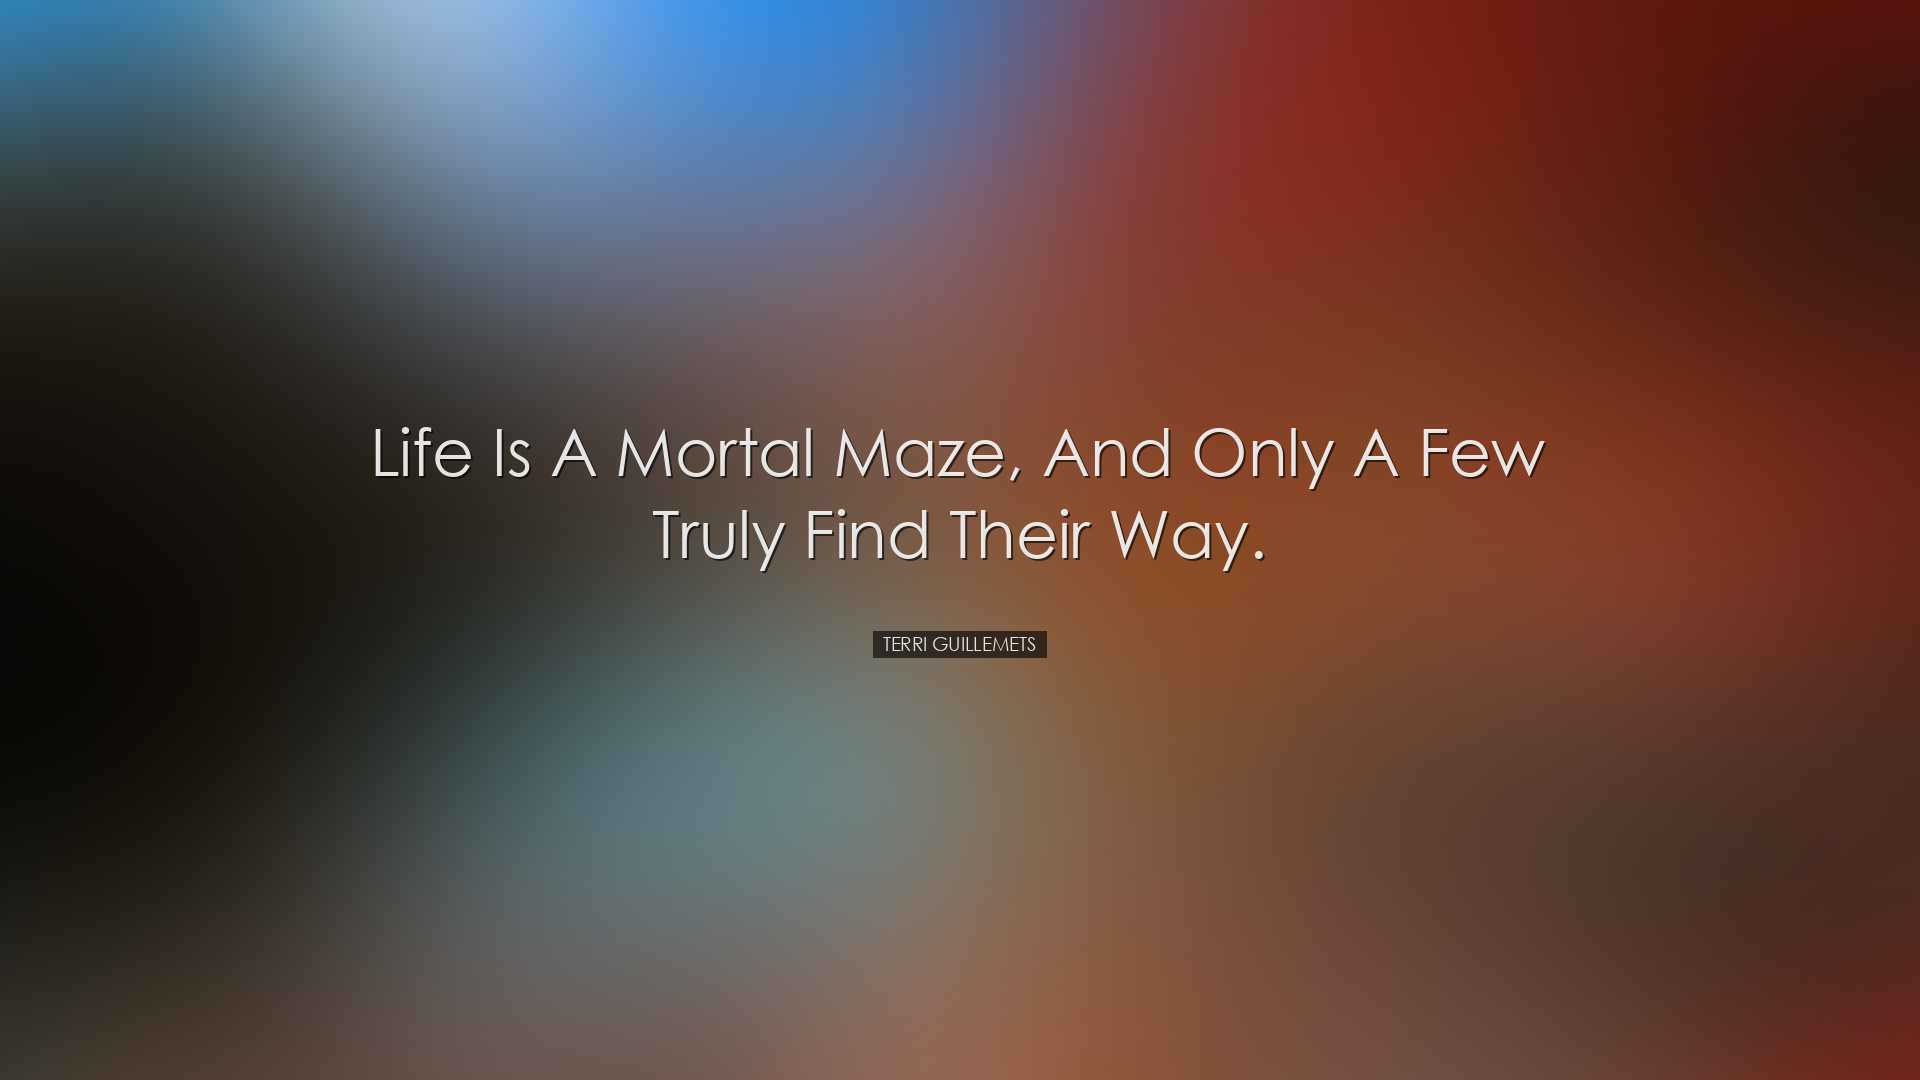 Life is a mortal maze, and only a few truly find their way. - Terr